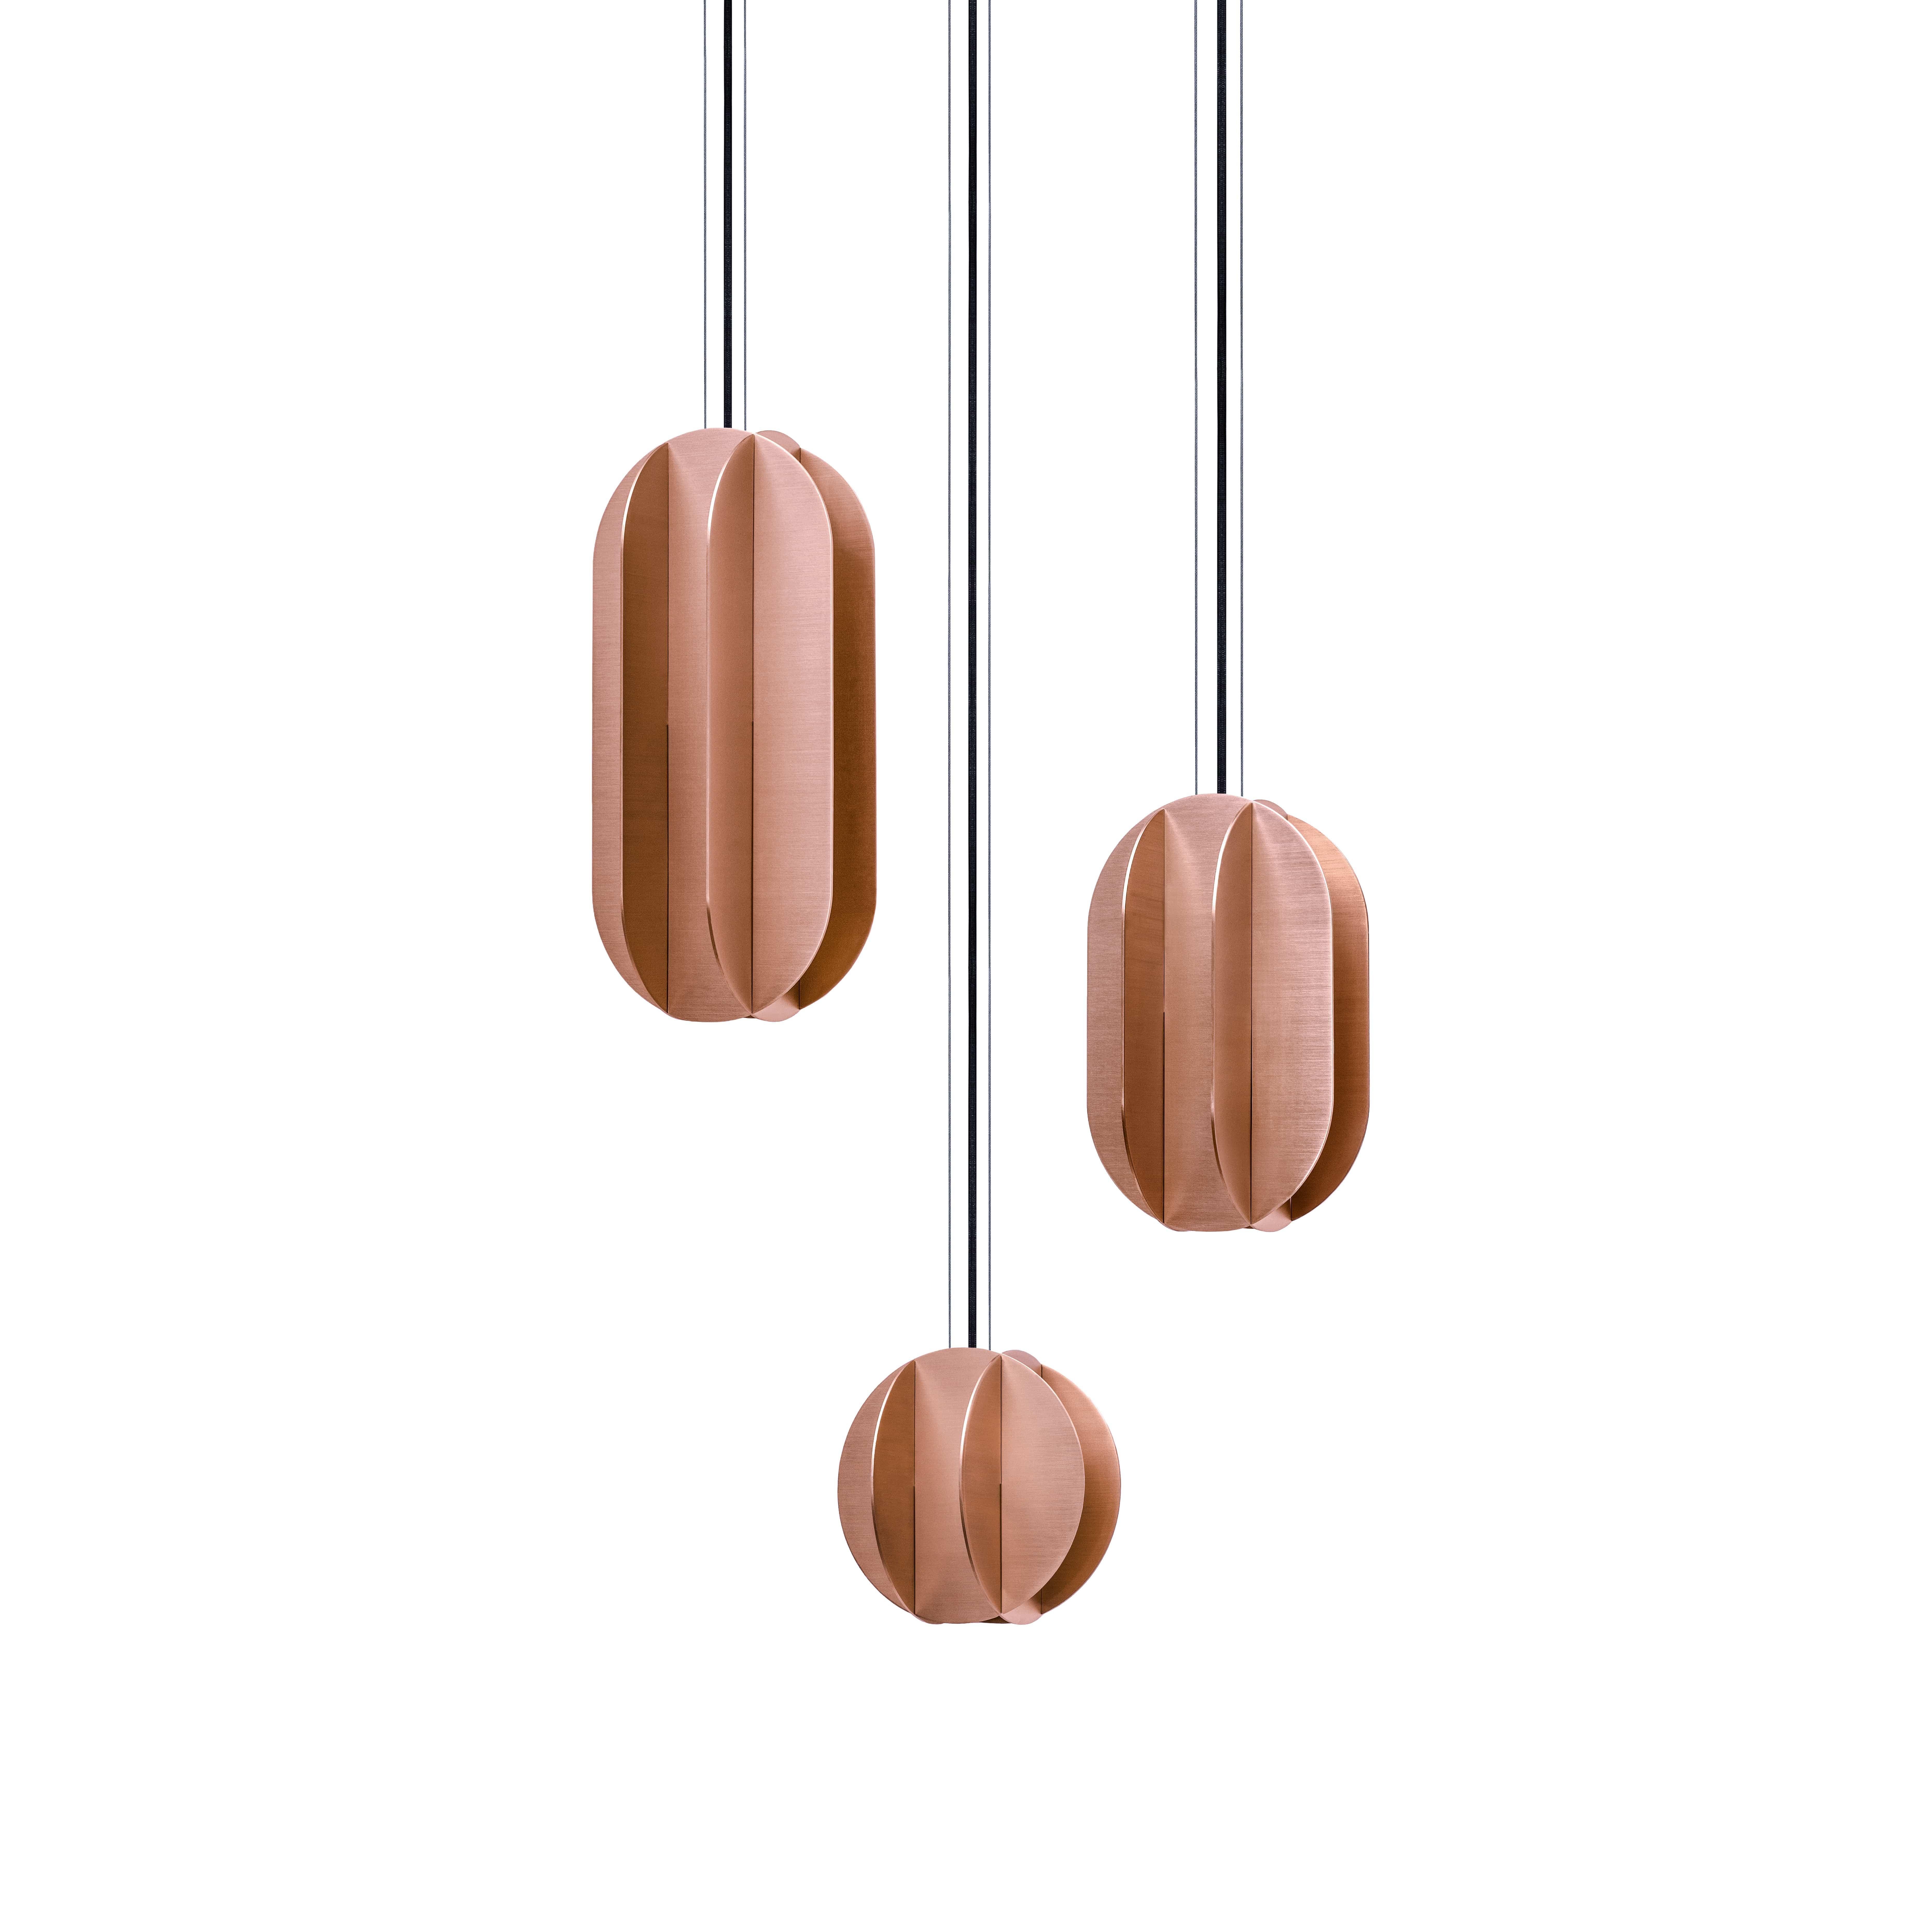 Brand: NOOM
Designer: Kateryna Sokolova
Materials: Copper
Dimensions: H 33 cm x W 15 cm x D 15 cm
Net Weight: 3 kg
Electrification: 2 × LED G9 10W.

EL collection of lighting is inspired by the geometric works of the great Suprematist artists El